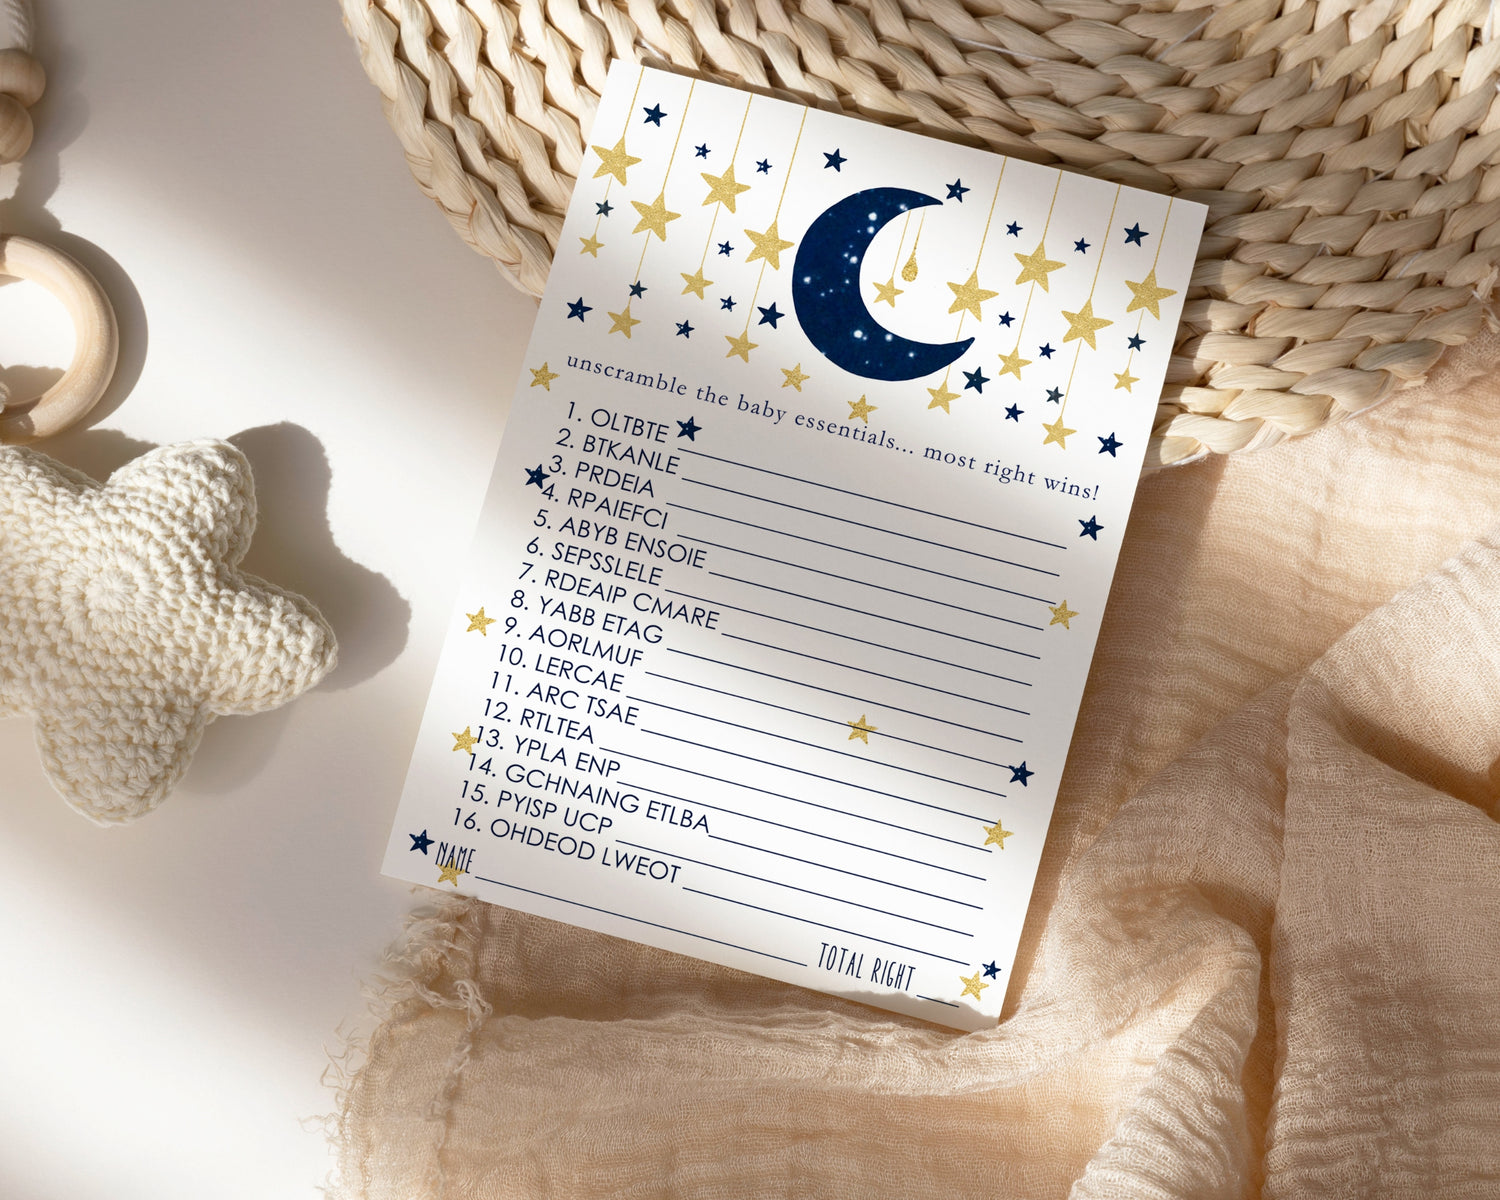 Sparkle with enchantment at your ‘Twinkle Little Star’ baby shower, featuring celestial navy blue and gold decor. Our collection includes stellar invitations, thank you cards, and games, all designed to celebrate your little boy’s arrival in cosmic style.